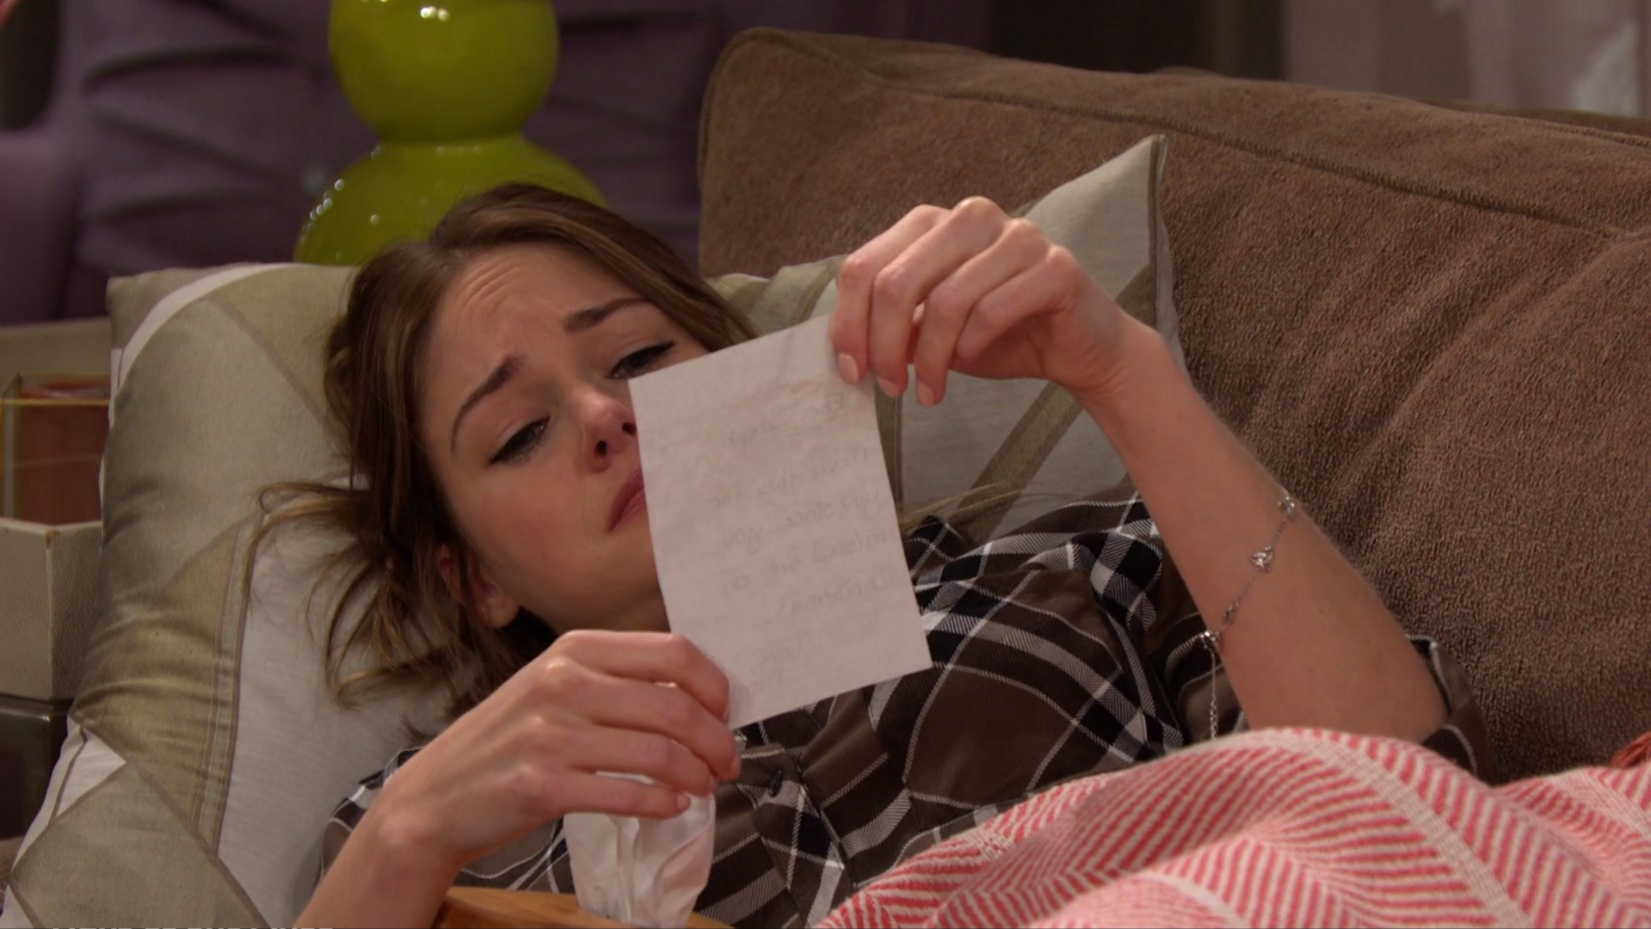 stephanie cries Days of our lives recaps Soapsspoilers